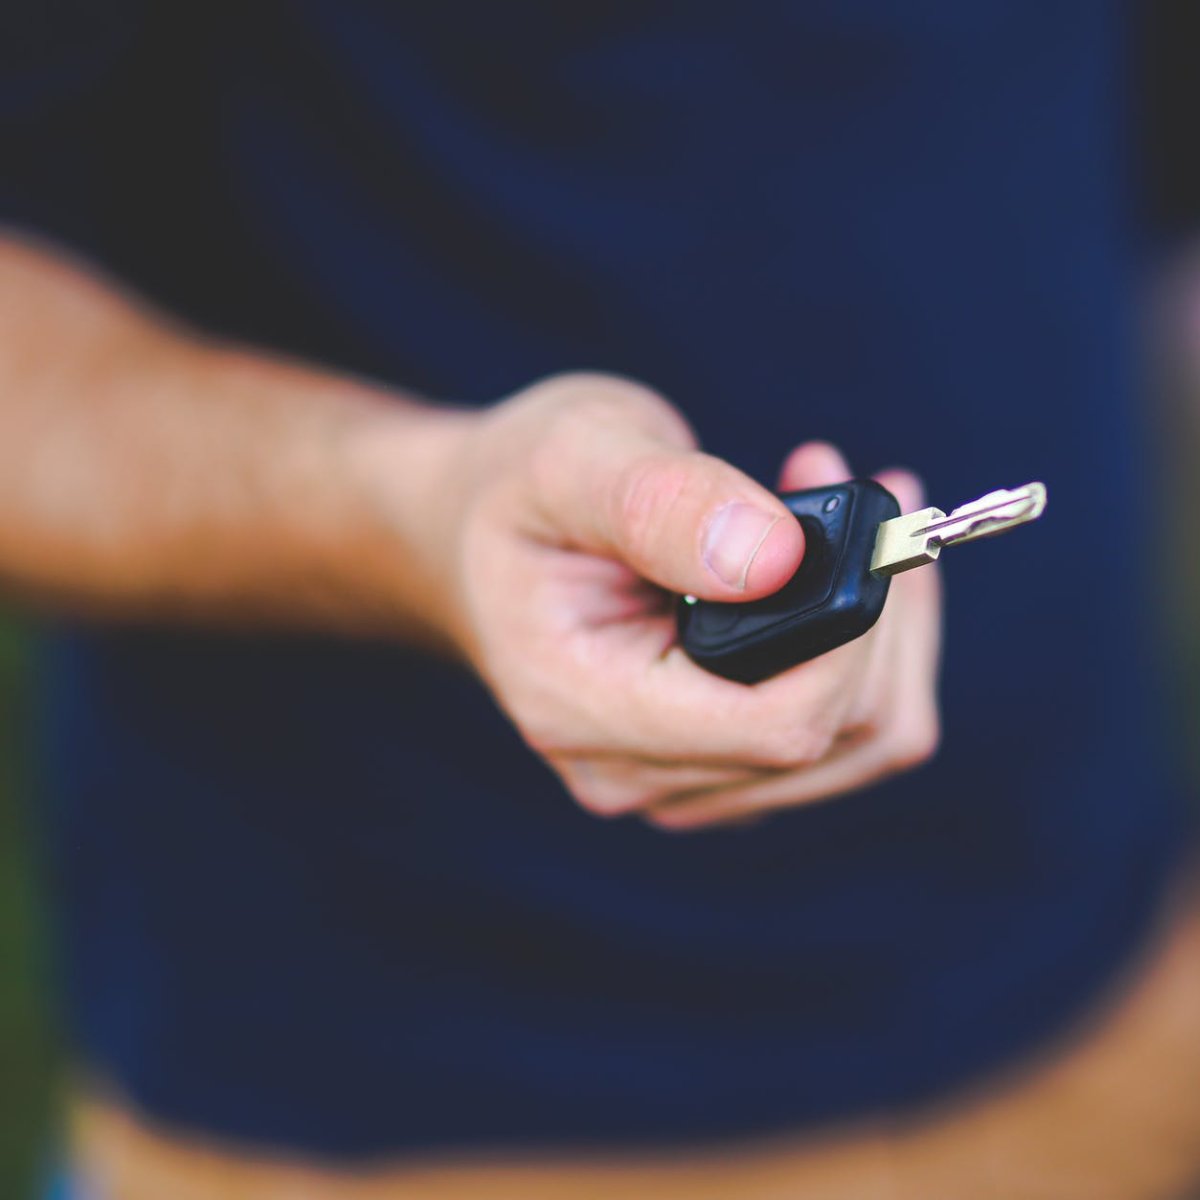 Many of us remember the exciting feeling of being handed our first set of car keys, so let's reminisce: What was your first car? Let us know in the comments! 🔑